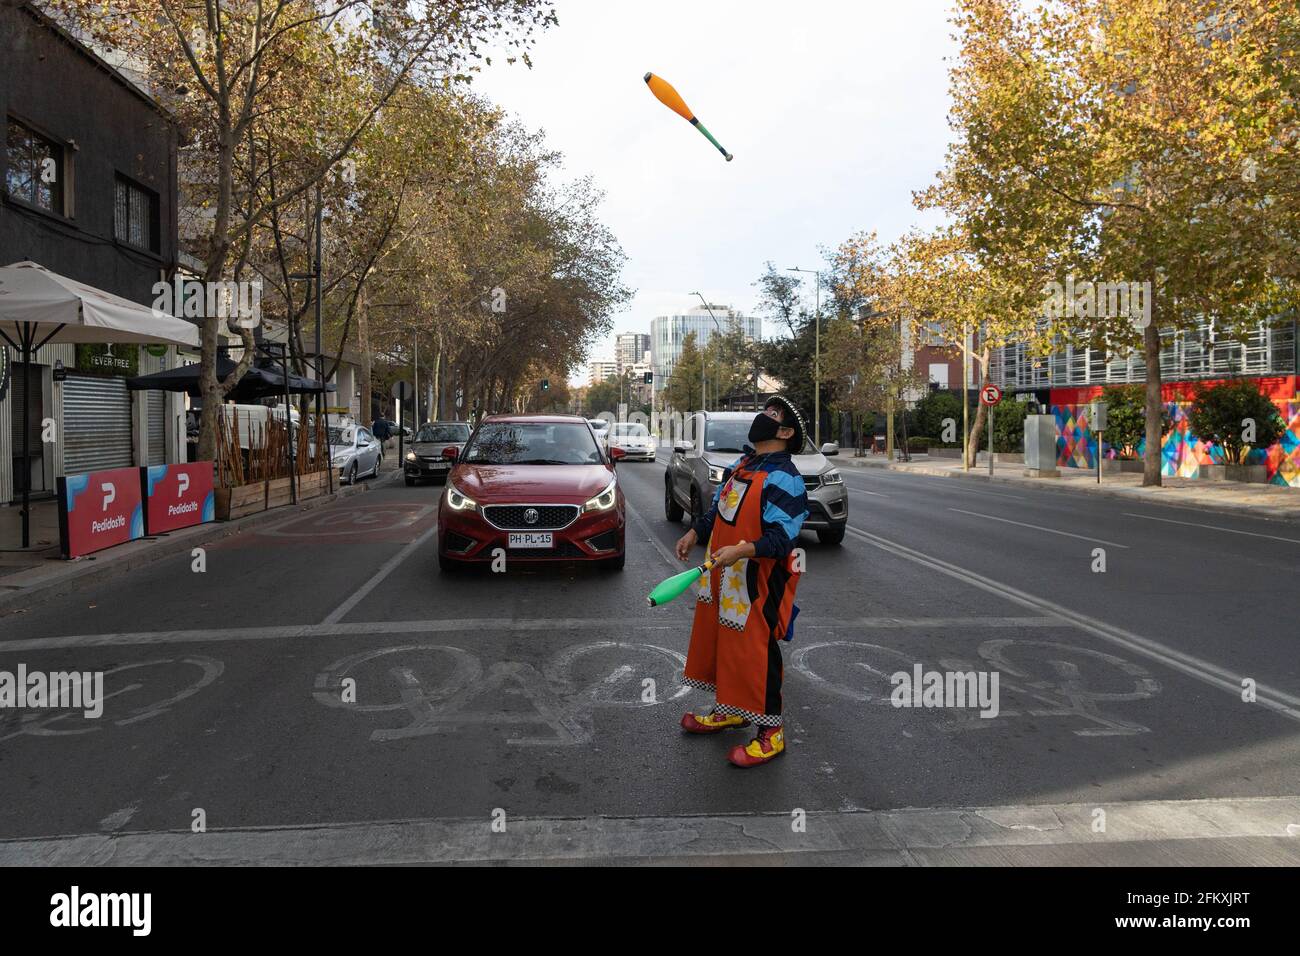 Santiago, Metropolitana, Chile. 4th May, 2021. A juggler with a mask performs at a traffic light in Santiago, Chile, amid the covid pandemic. Credit: Matias Basualdo/ZUMA Wire/Alamy Live News Stock Photo